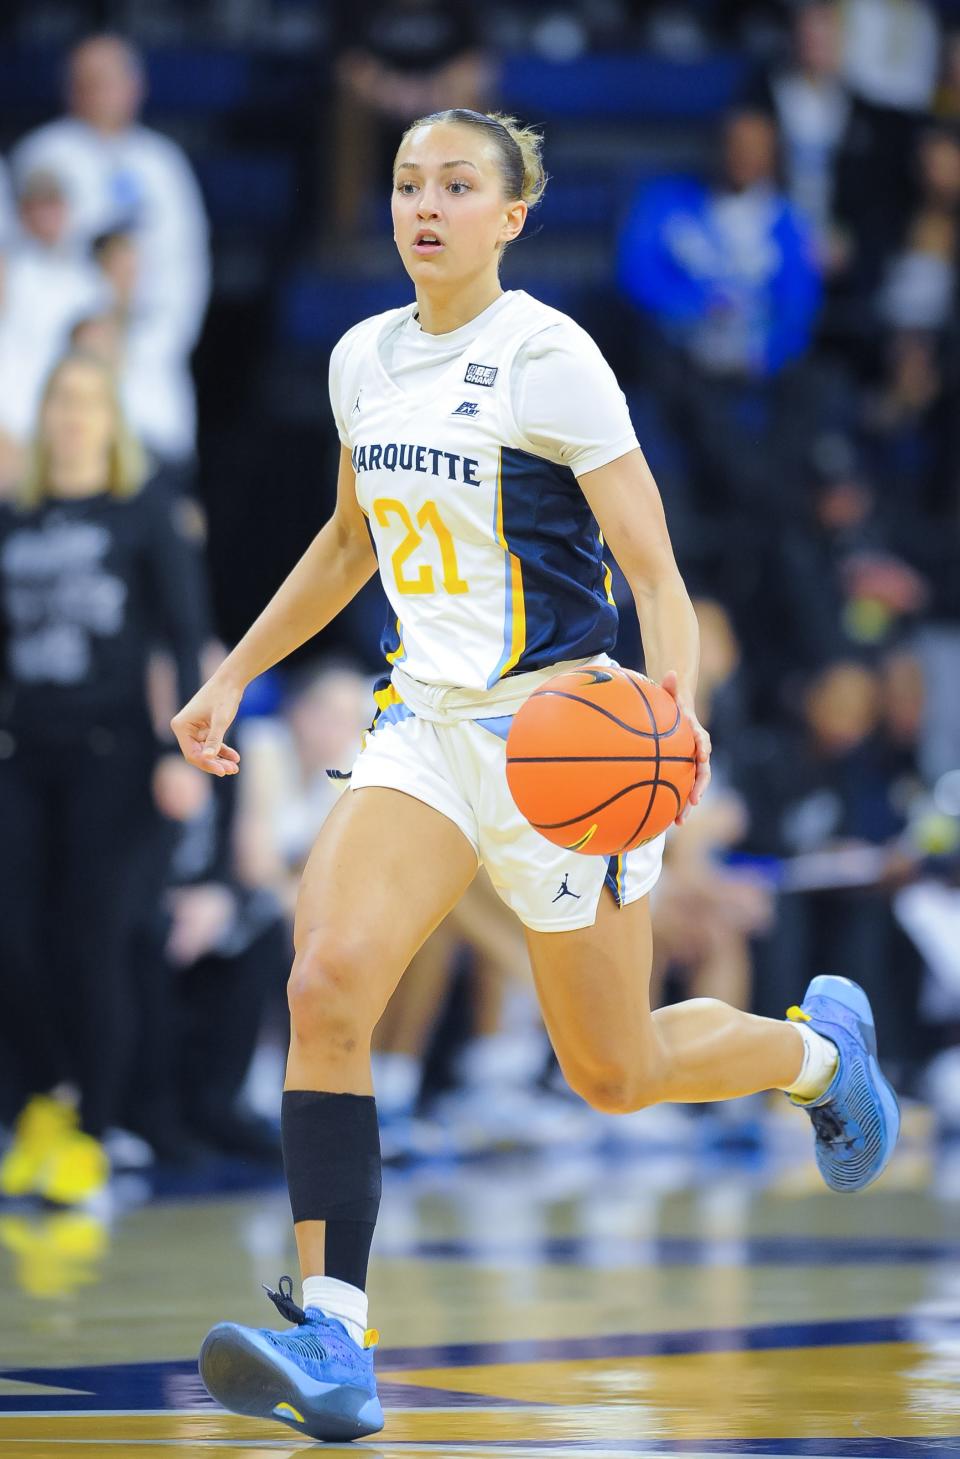 Emily La Chapell, who made the all-Big East freshman team for Marquette last season, has entered the transfer portal.